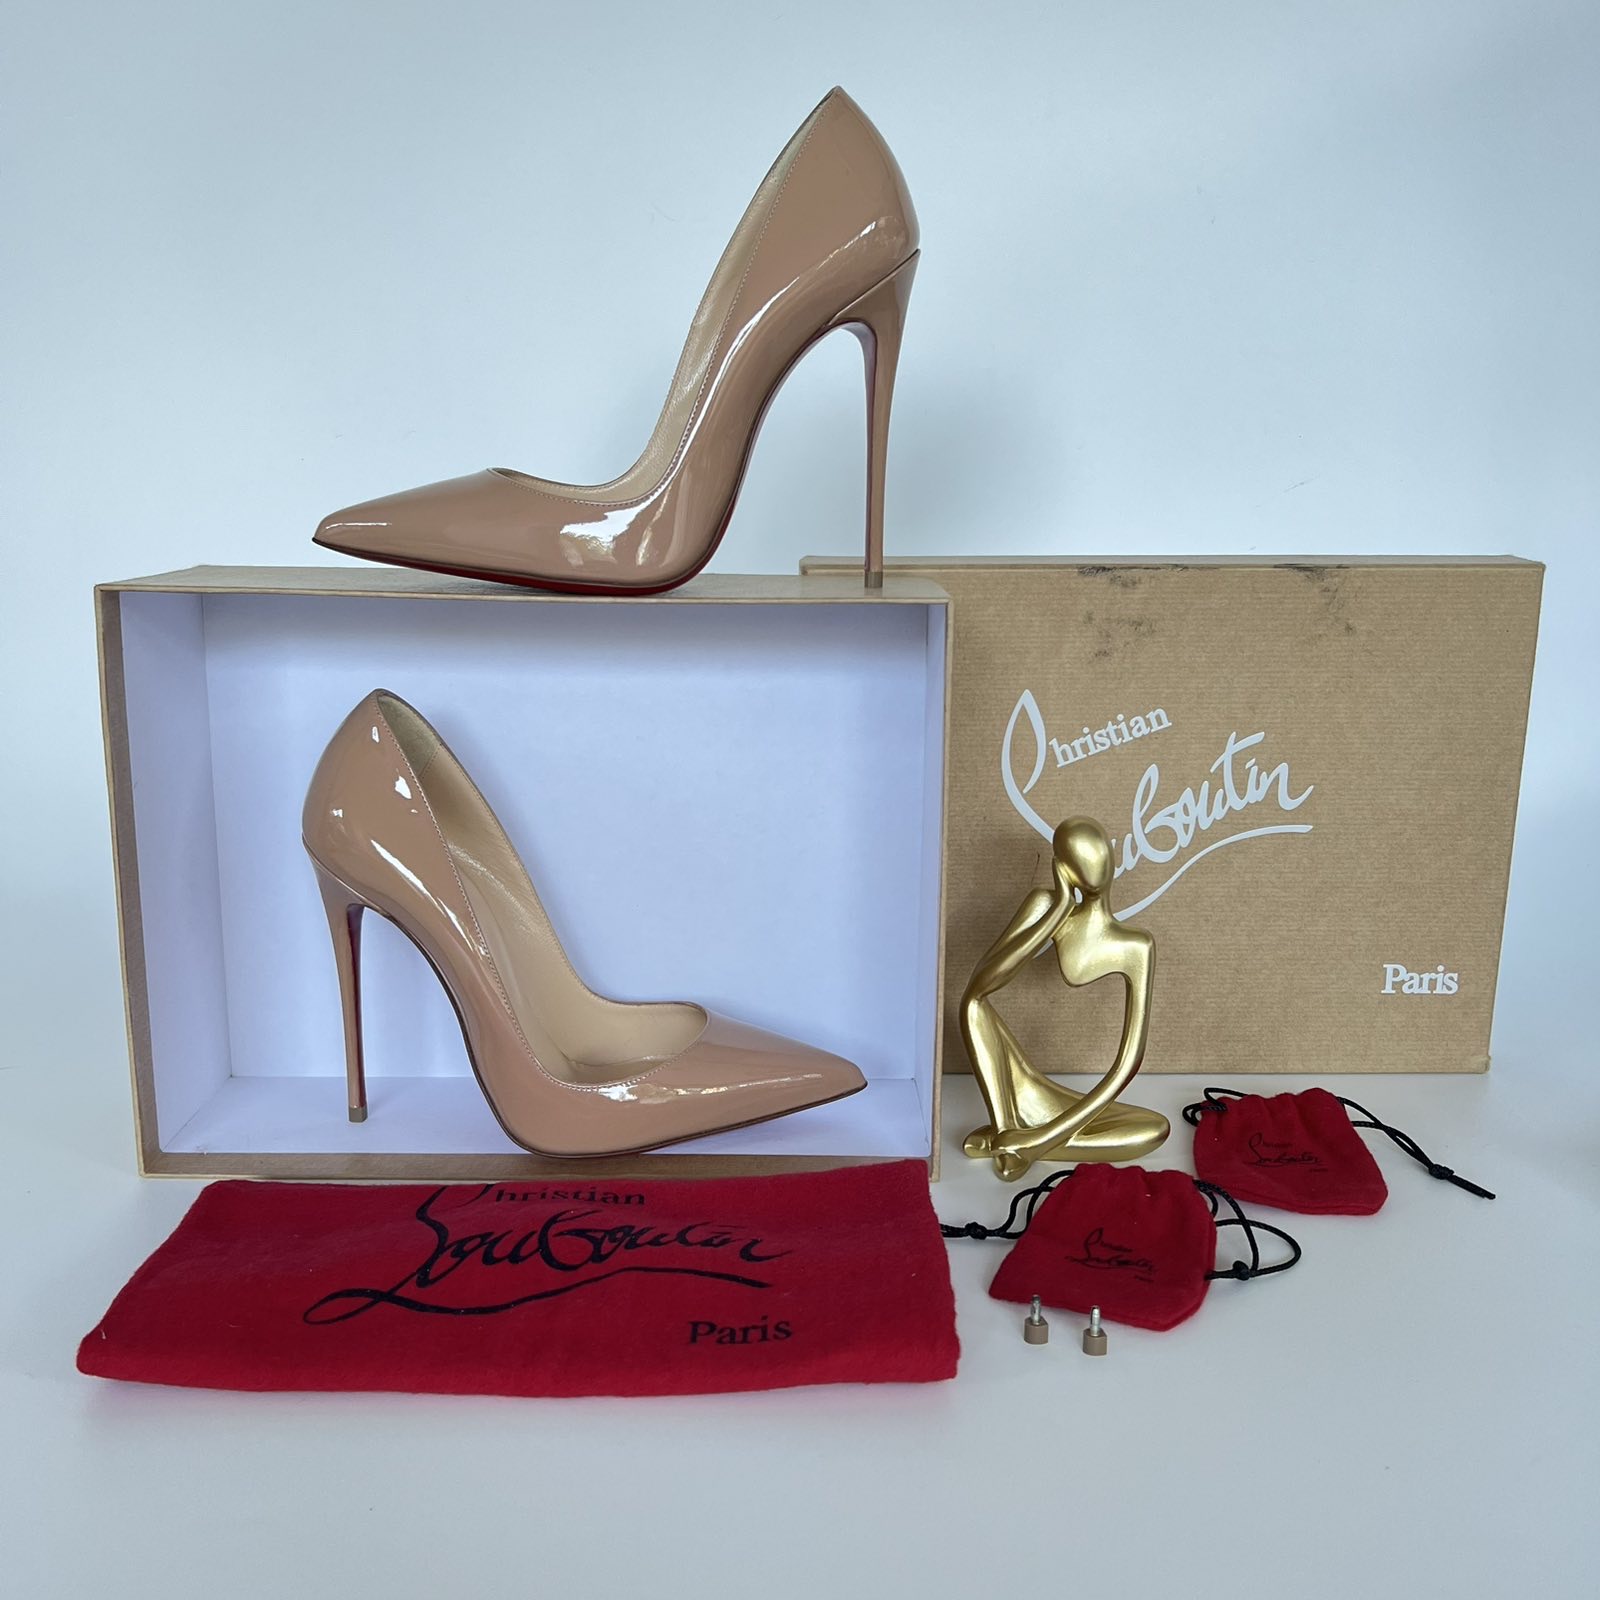 Louboutin Beige Patent Heels Size 36 ½. Made in Italy. With dustbag & box ❤️ - Canon E-Bags Prime